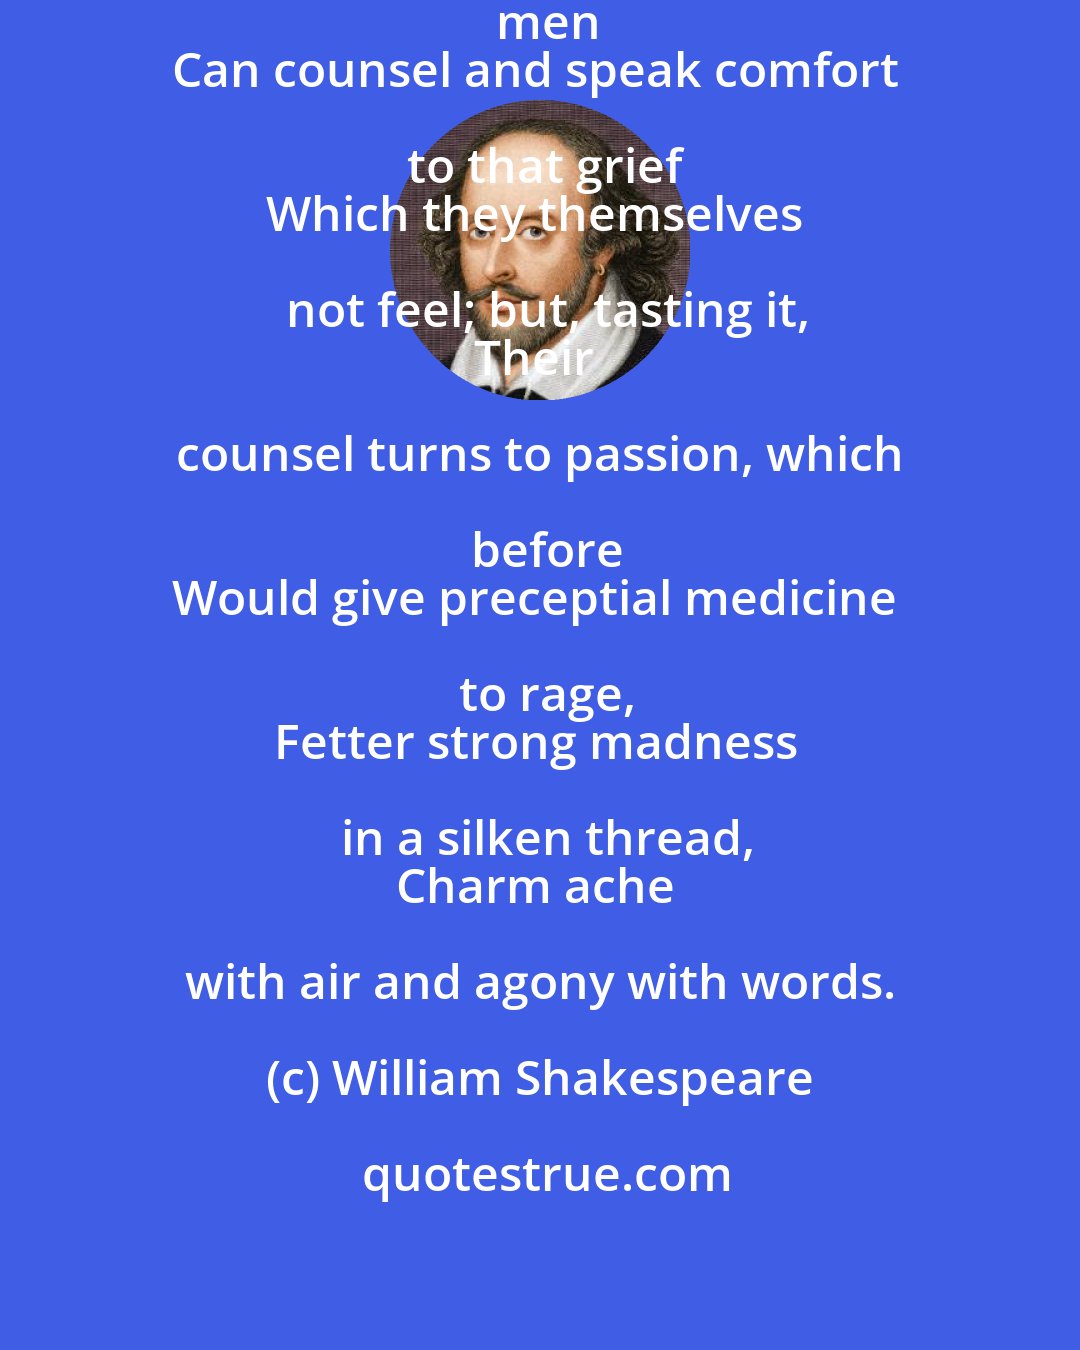 William Shakespeare: But there is no such man; for, brother, men
Can counsel and speak comfort to that grief
Which they themselves not feel; but, tasting it,
Their counsel turns to passion, which before
Would give preceptial medicine to rage,
Fetter strong madness in a silken thread,
Charm ache with air and agony with words.